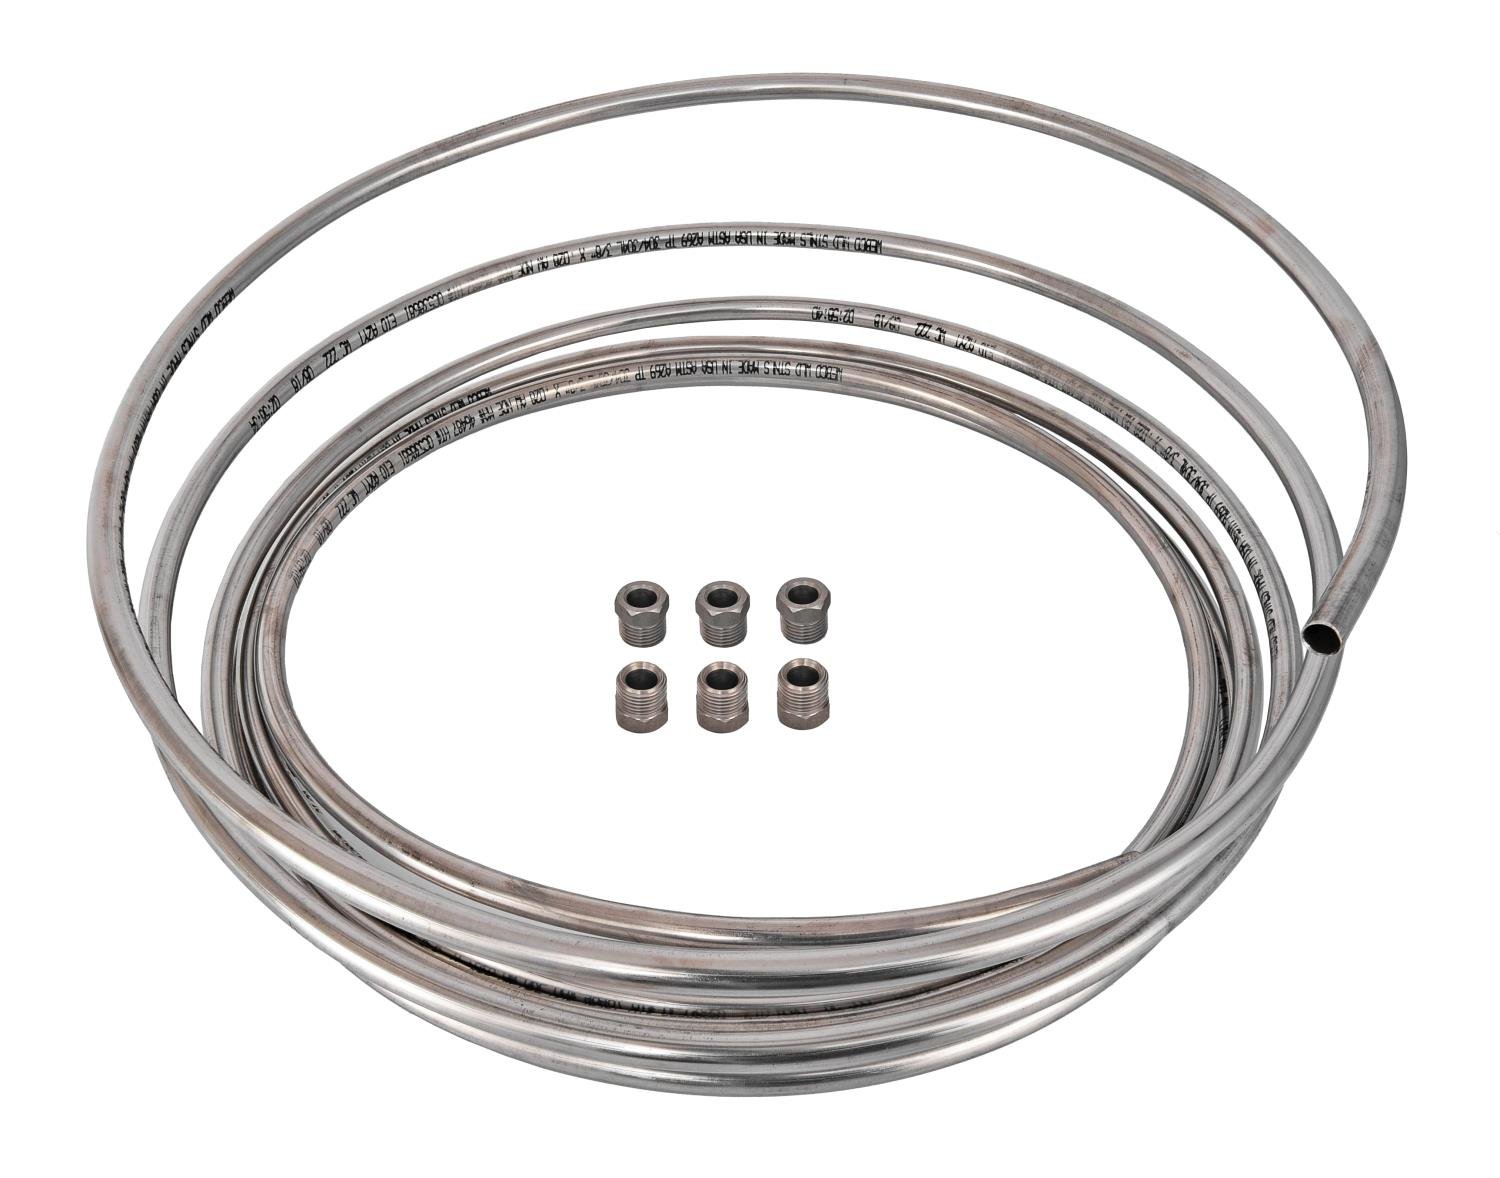 JEGS 555-635208: Stainless Steel Fuel Line Coil Kit 3/8 in. x .028  in. Wall Includes 20 ft. Stainless Steel Tubing and Ten 3/8 in. Tube Nuts  JEGS